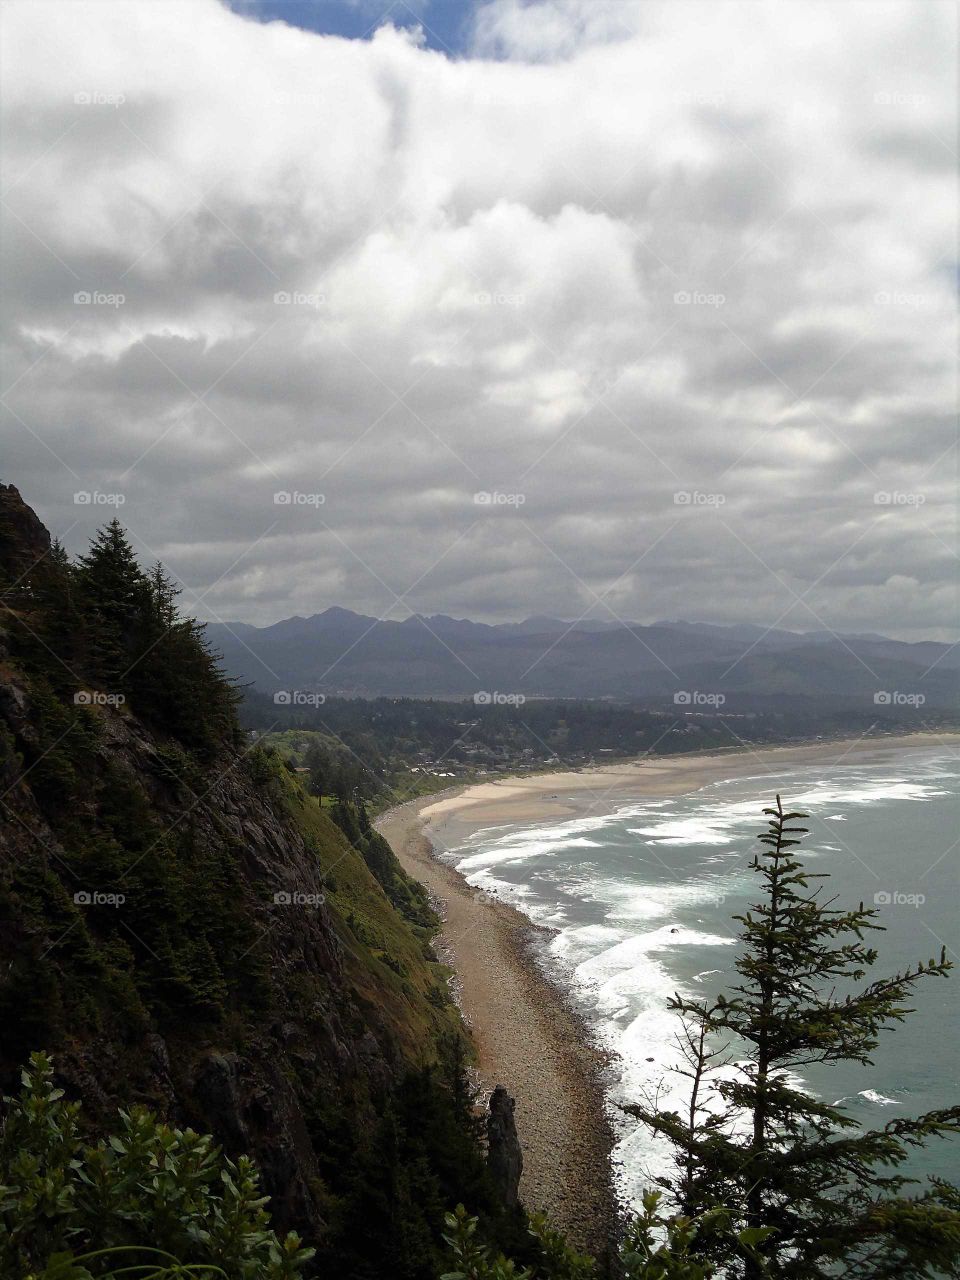 view of the Oregon coast on a cloudy day